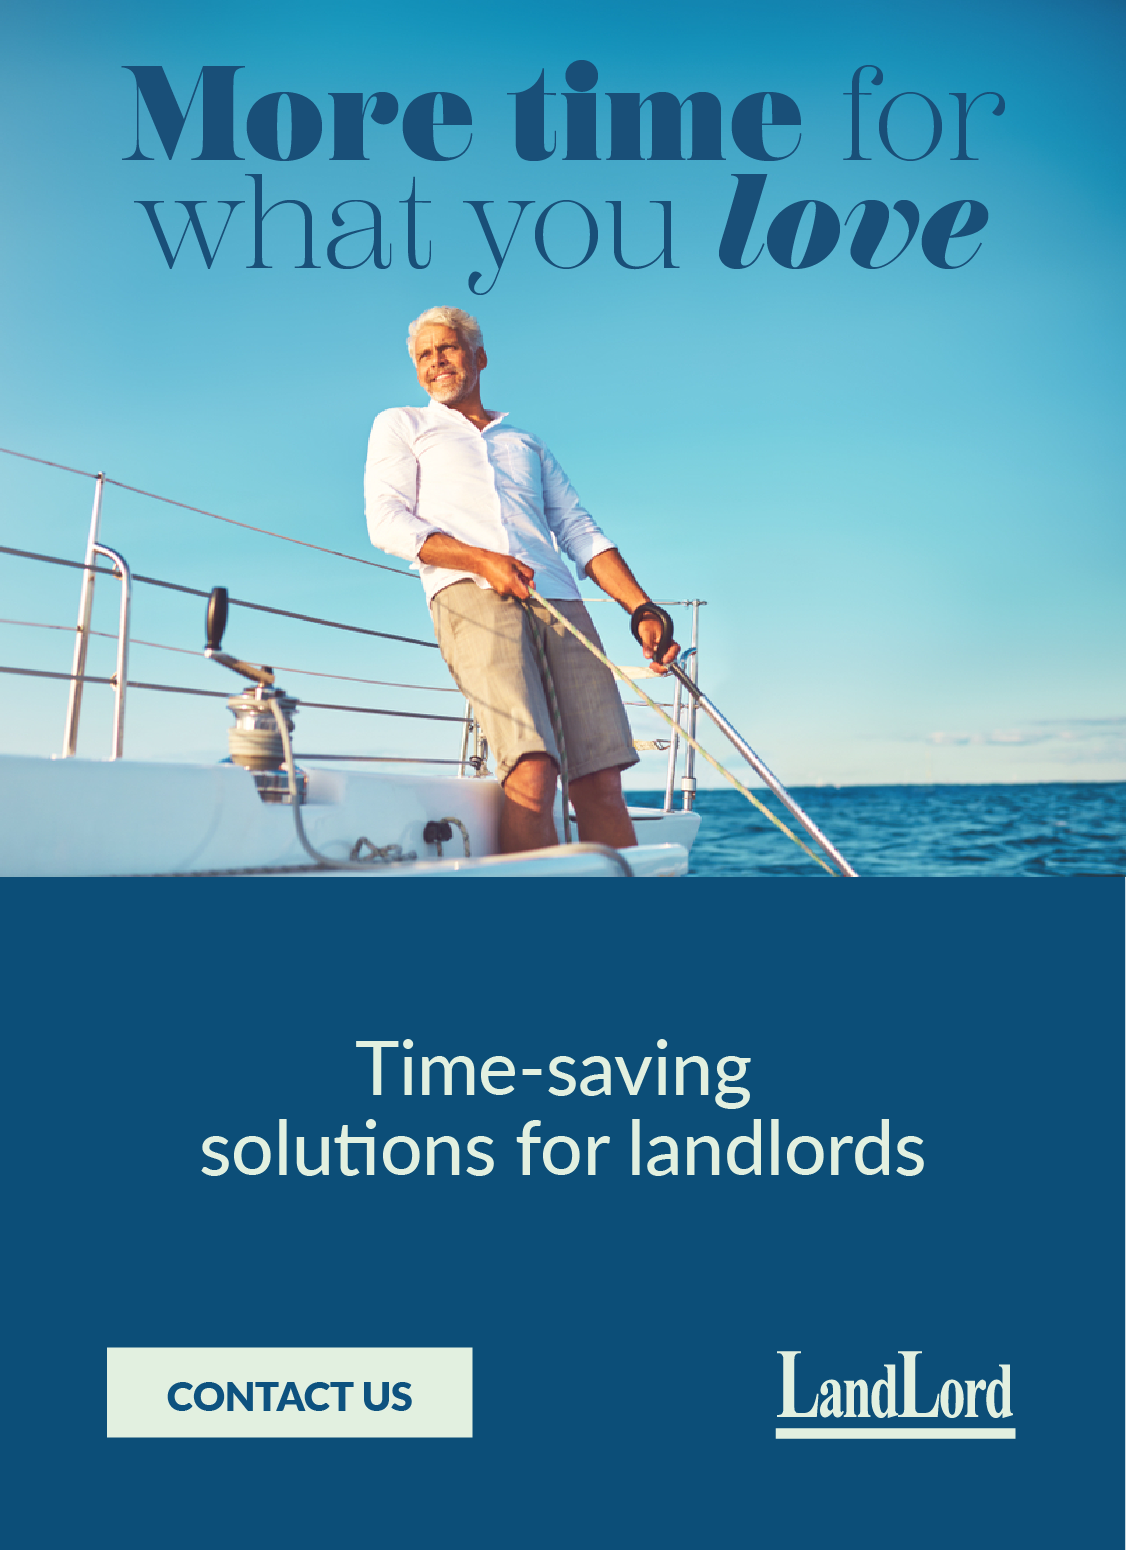 An image banner with the line 'More time for what you love' set on a photograph of a man sailing with the blue sky in the background. Below the photo is a blue area with the line 'Time-saving solutions for landlords' and a button that says 'contact us'.